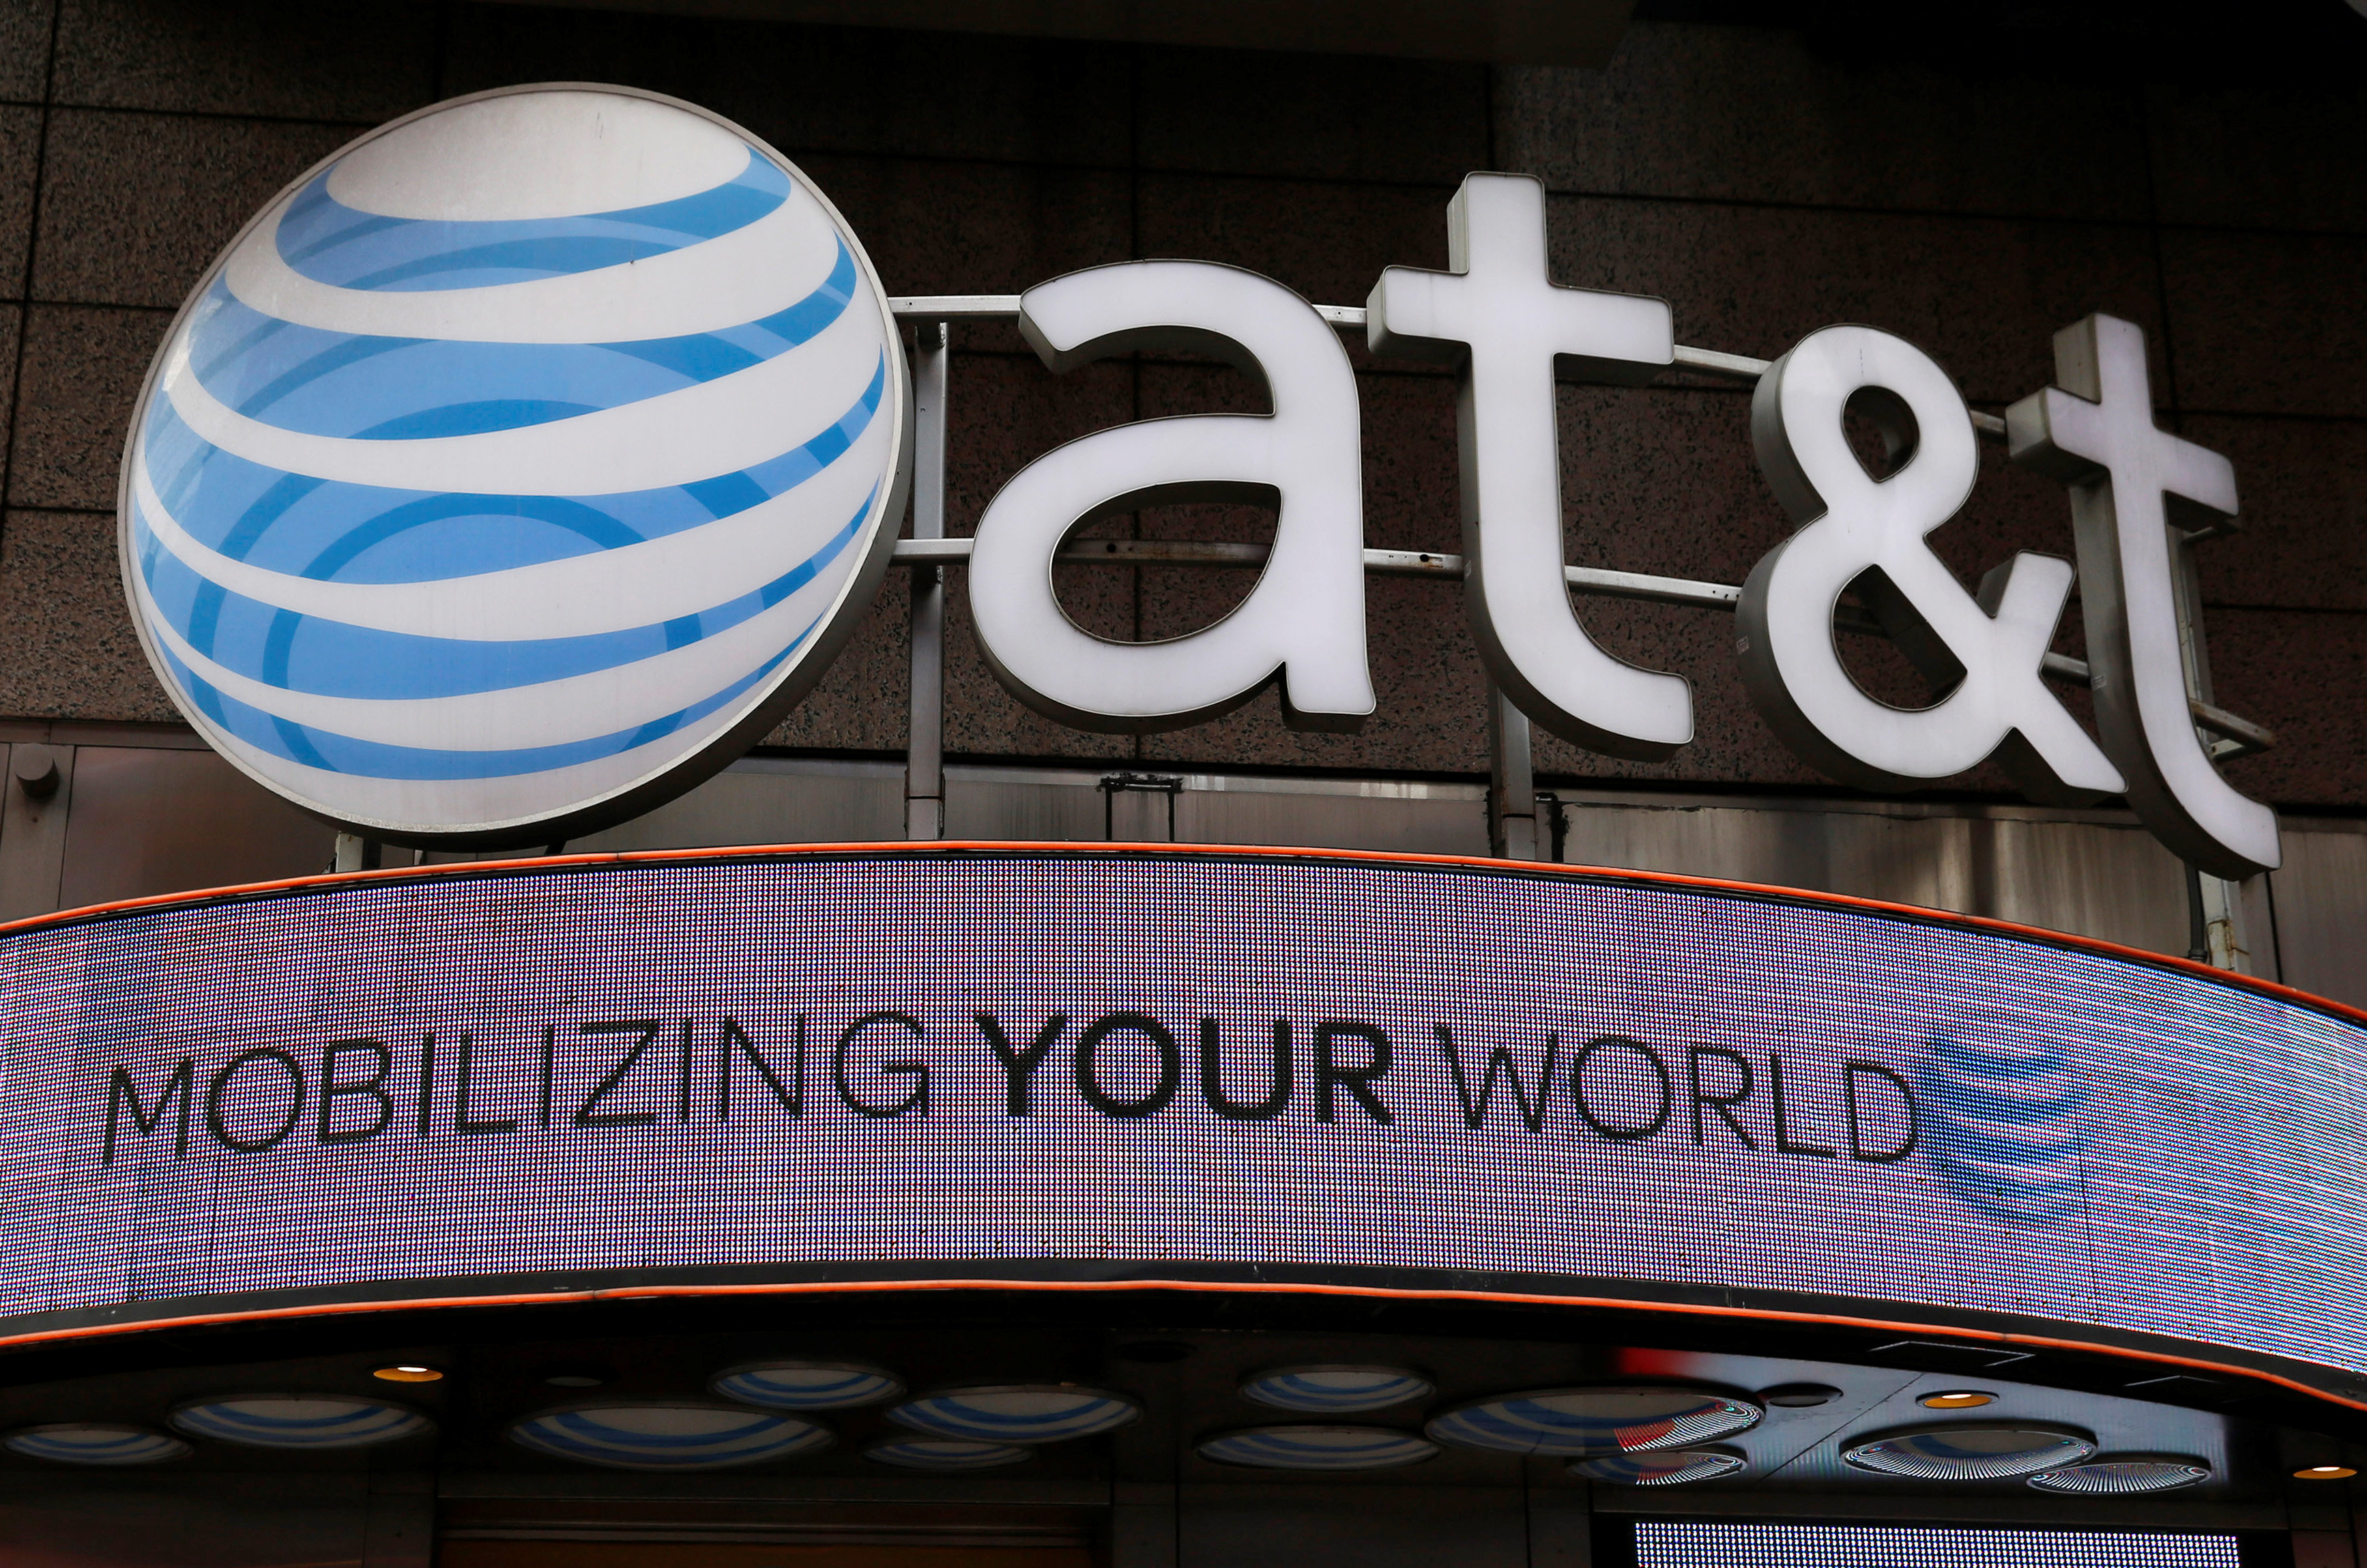 The new entity is expected to be owned by AT&amp;T and Discovery, according to a CNBC report, but no details were immediately released. — Reuters pic